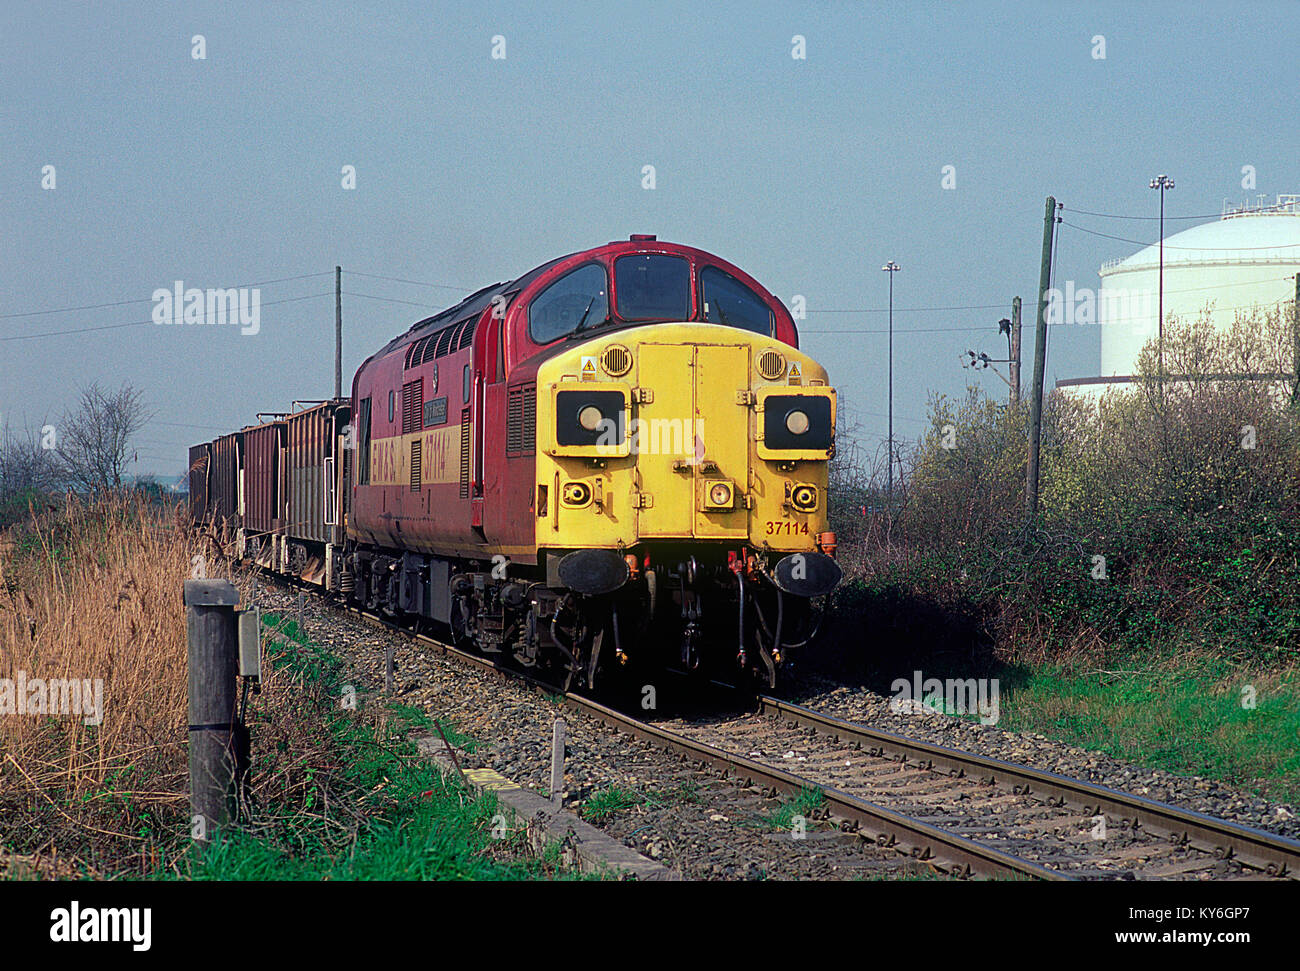 A class 37 diesel locomotive number 37114 working a train of empty ballast wagons approaching Grain Crossing on the Grain branch in Kent. 25th March 2002. Stock Photo